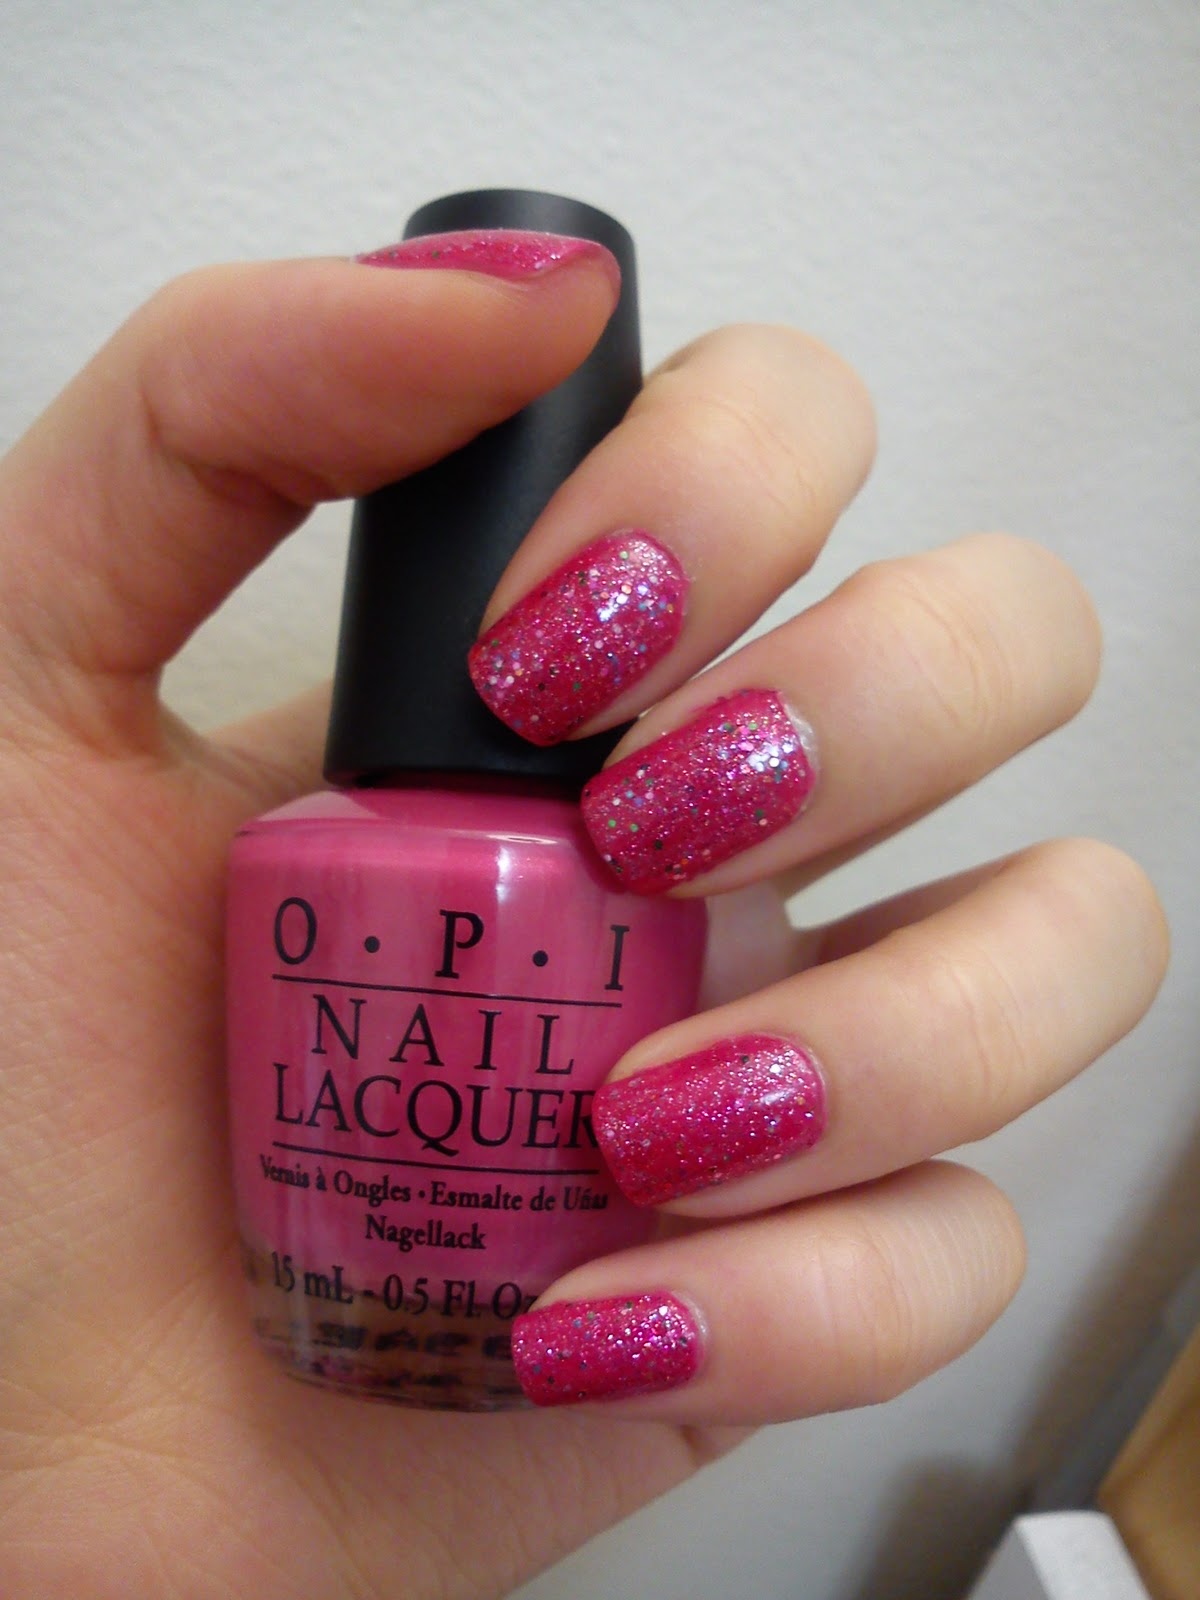 Bottles of dreams: OPI Excuse Moi!